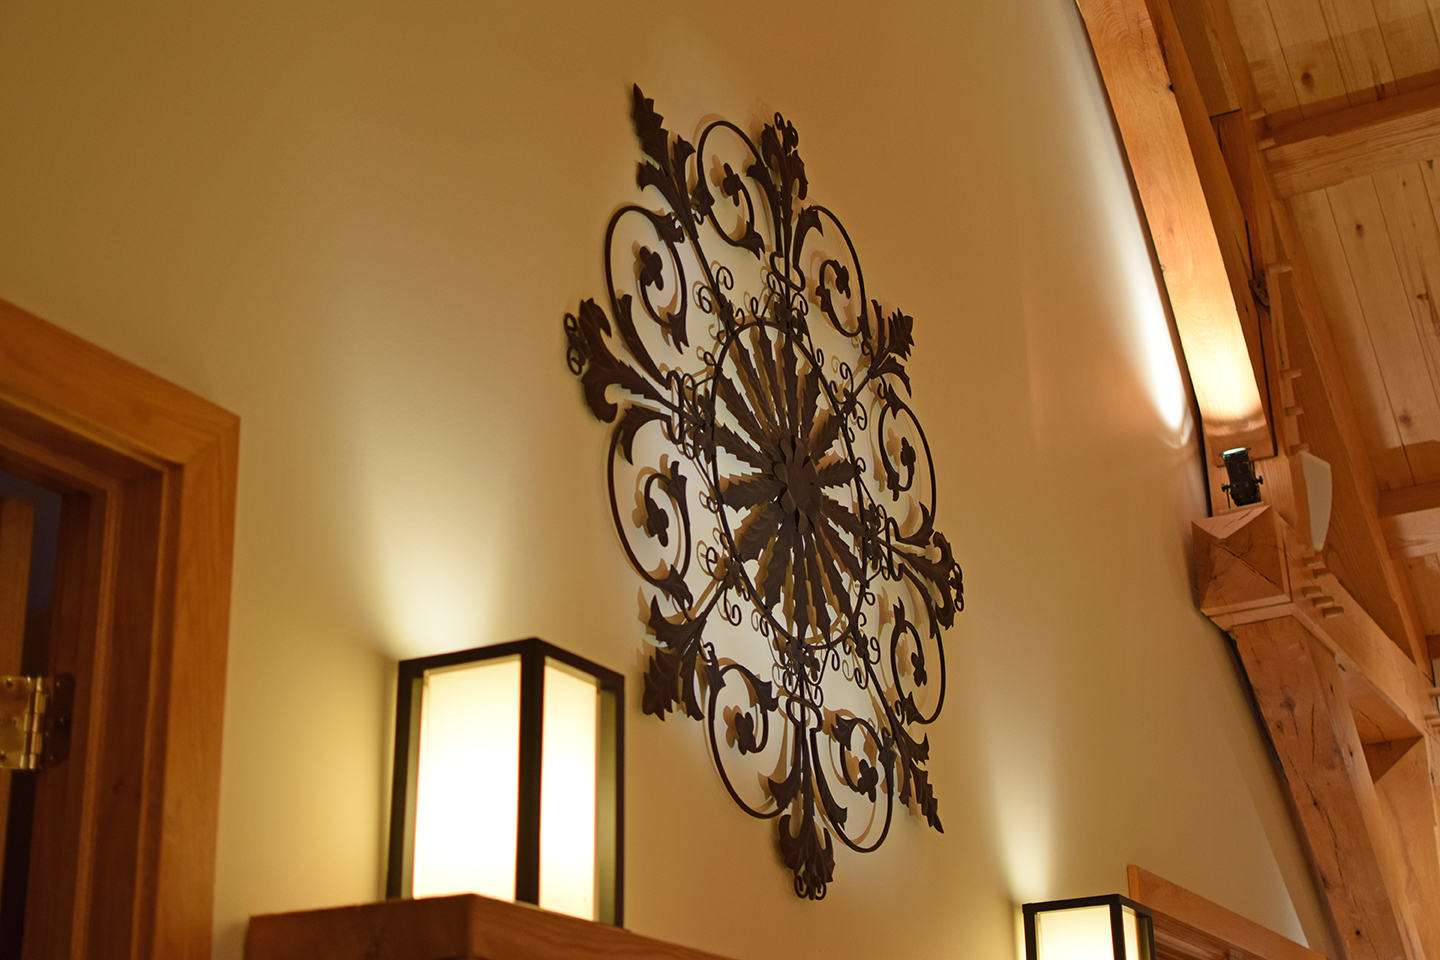 A photograph of an intricate, metal filligree hanging on the wall of a great room.